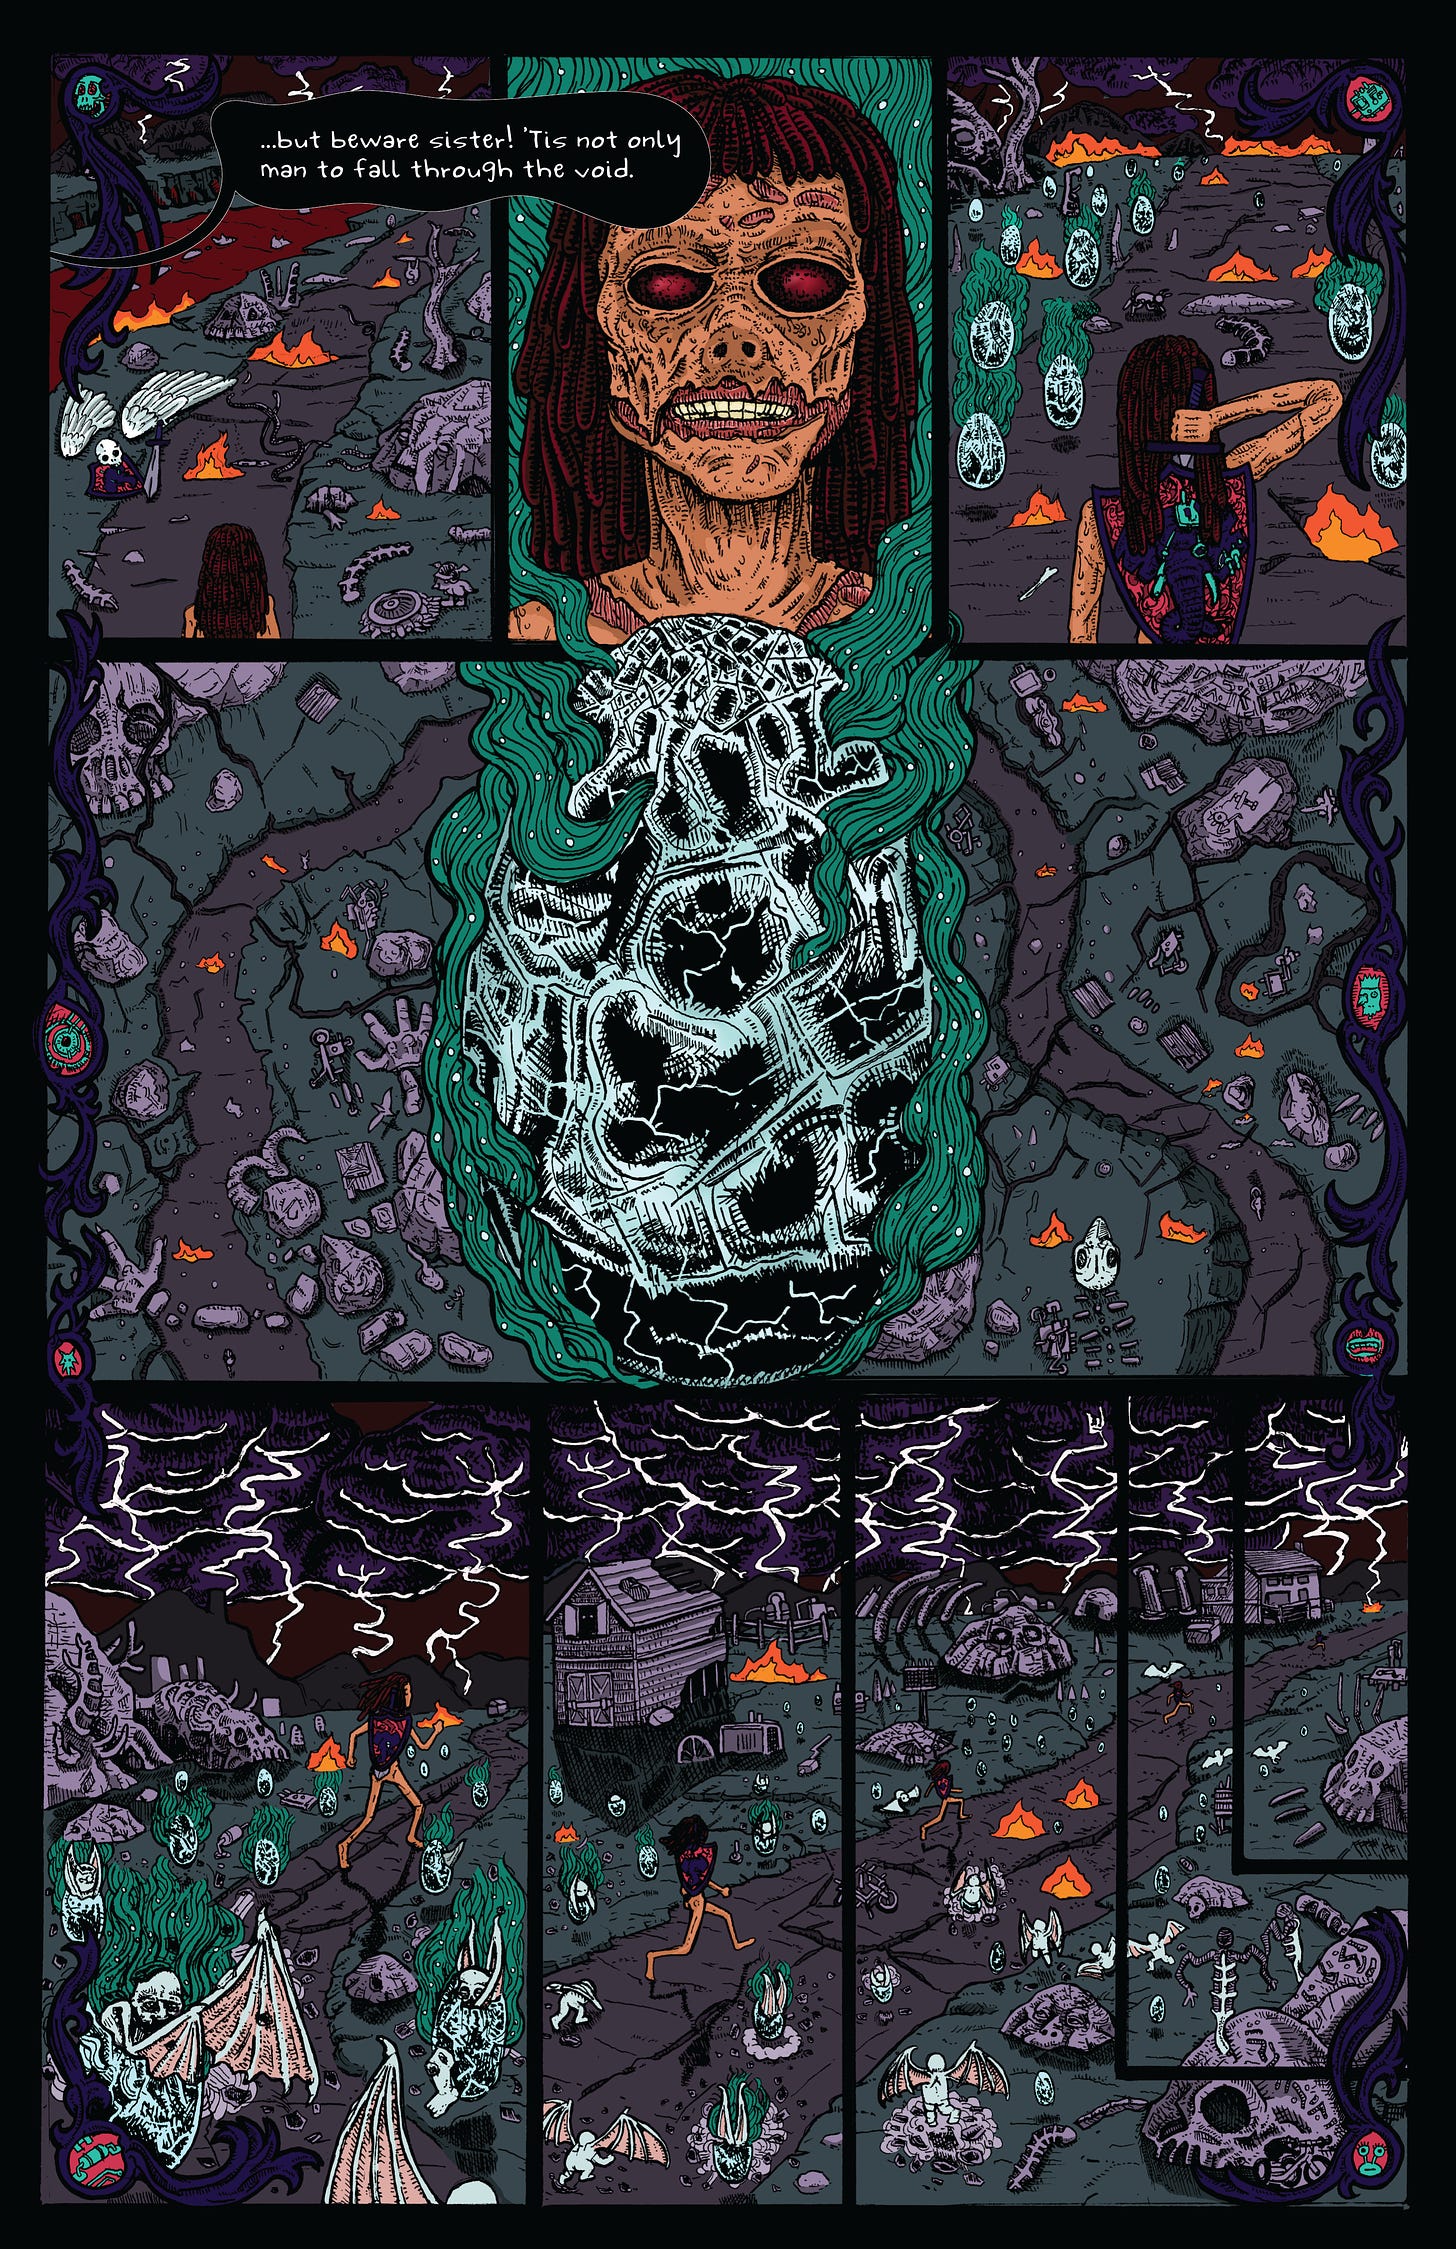 page 6 of skingirl. Skingirl finds herself in a field of demon eggs. From off panel Enzo yells "but beware, sister! 'Tis not only man to fall through the void. Skingirl picks up a sword and shield and runs through the hatching eggs.